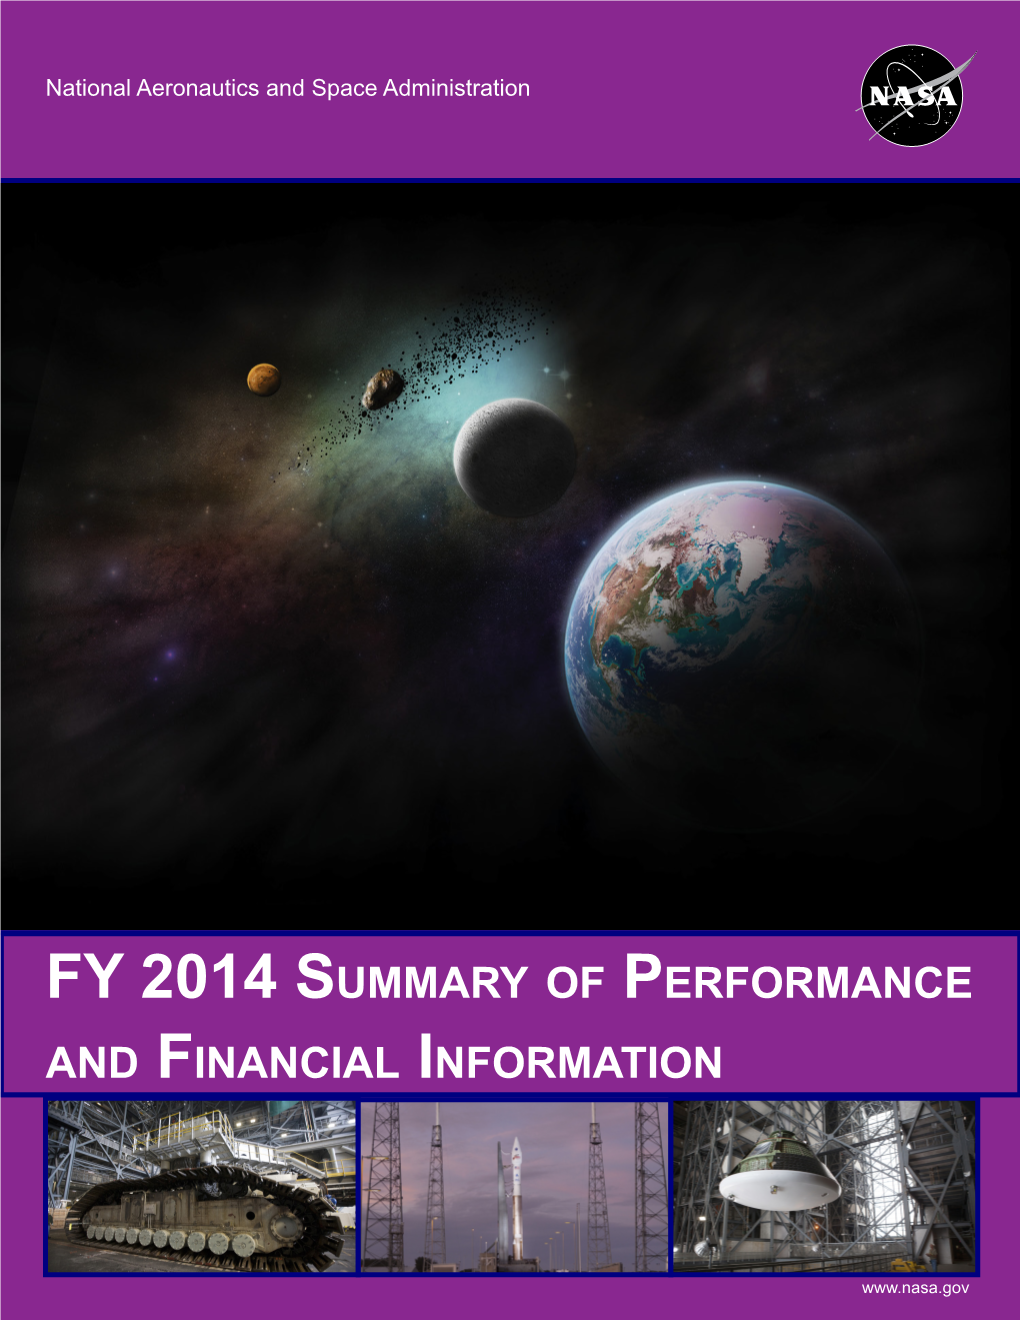 FY 2014 Summary of Performance and Financial Information